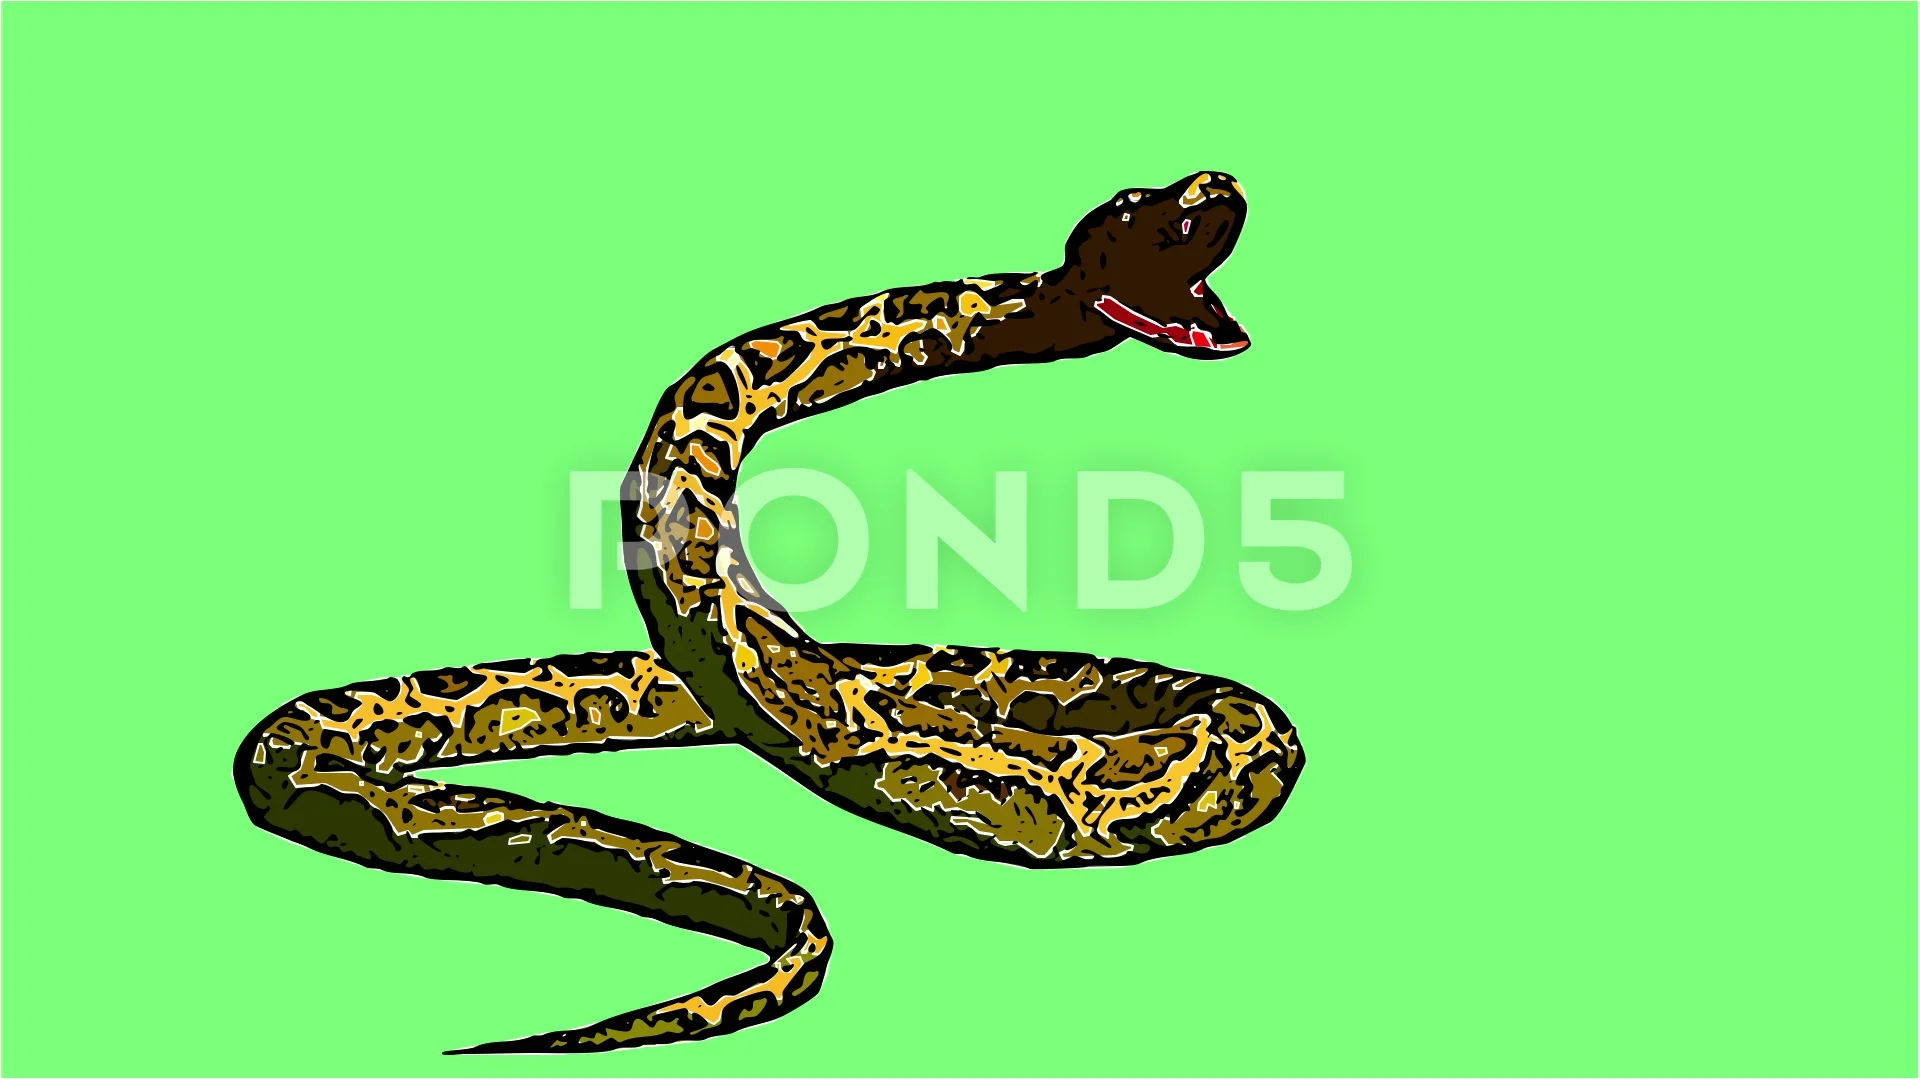 2d animation in comic style - Snake pyth... | Stock Video | Pond5